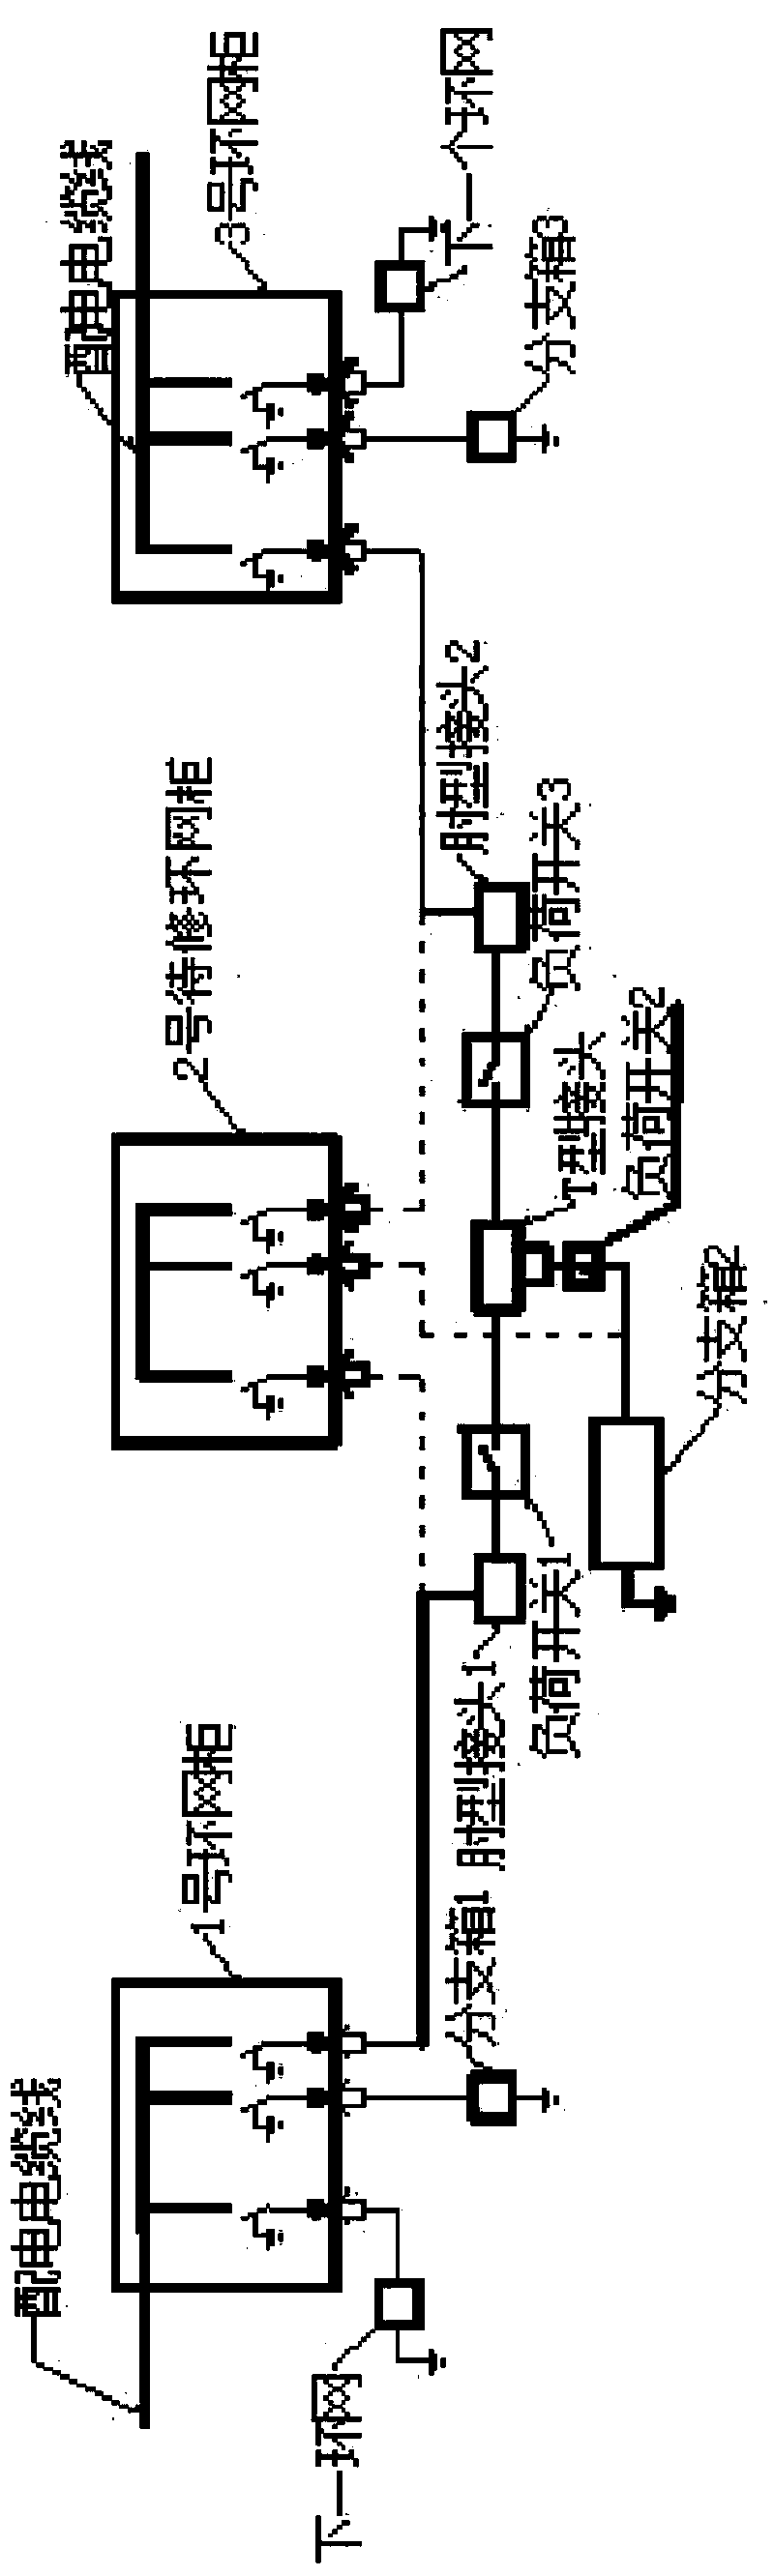 Method for overhauling ring main unit of 10kV cable circuit without switching power supply off